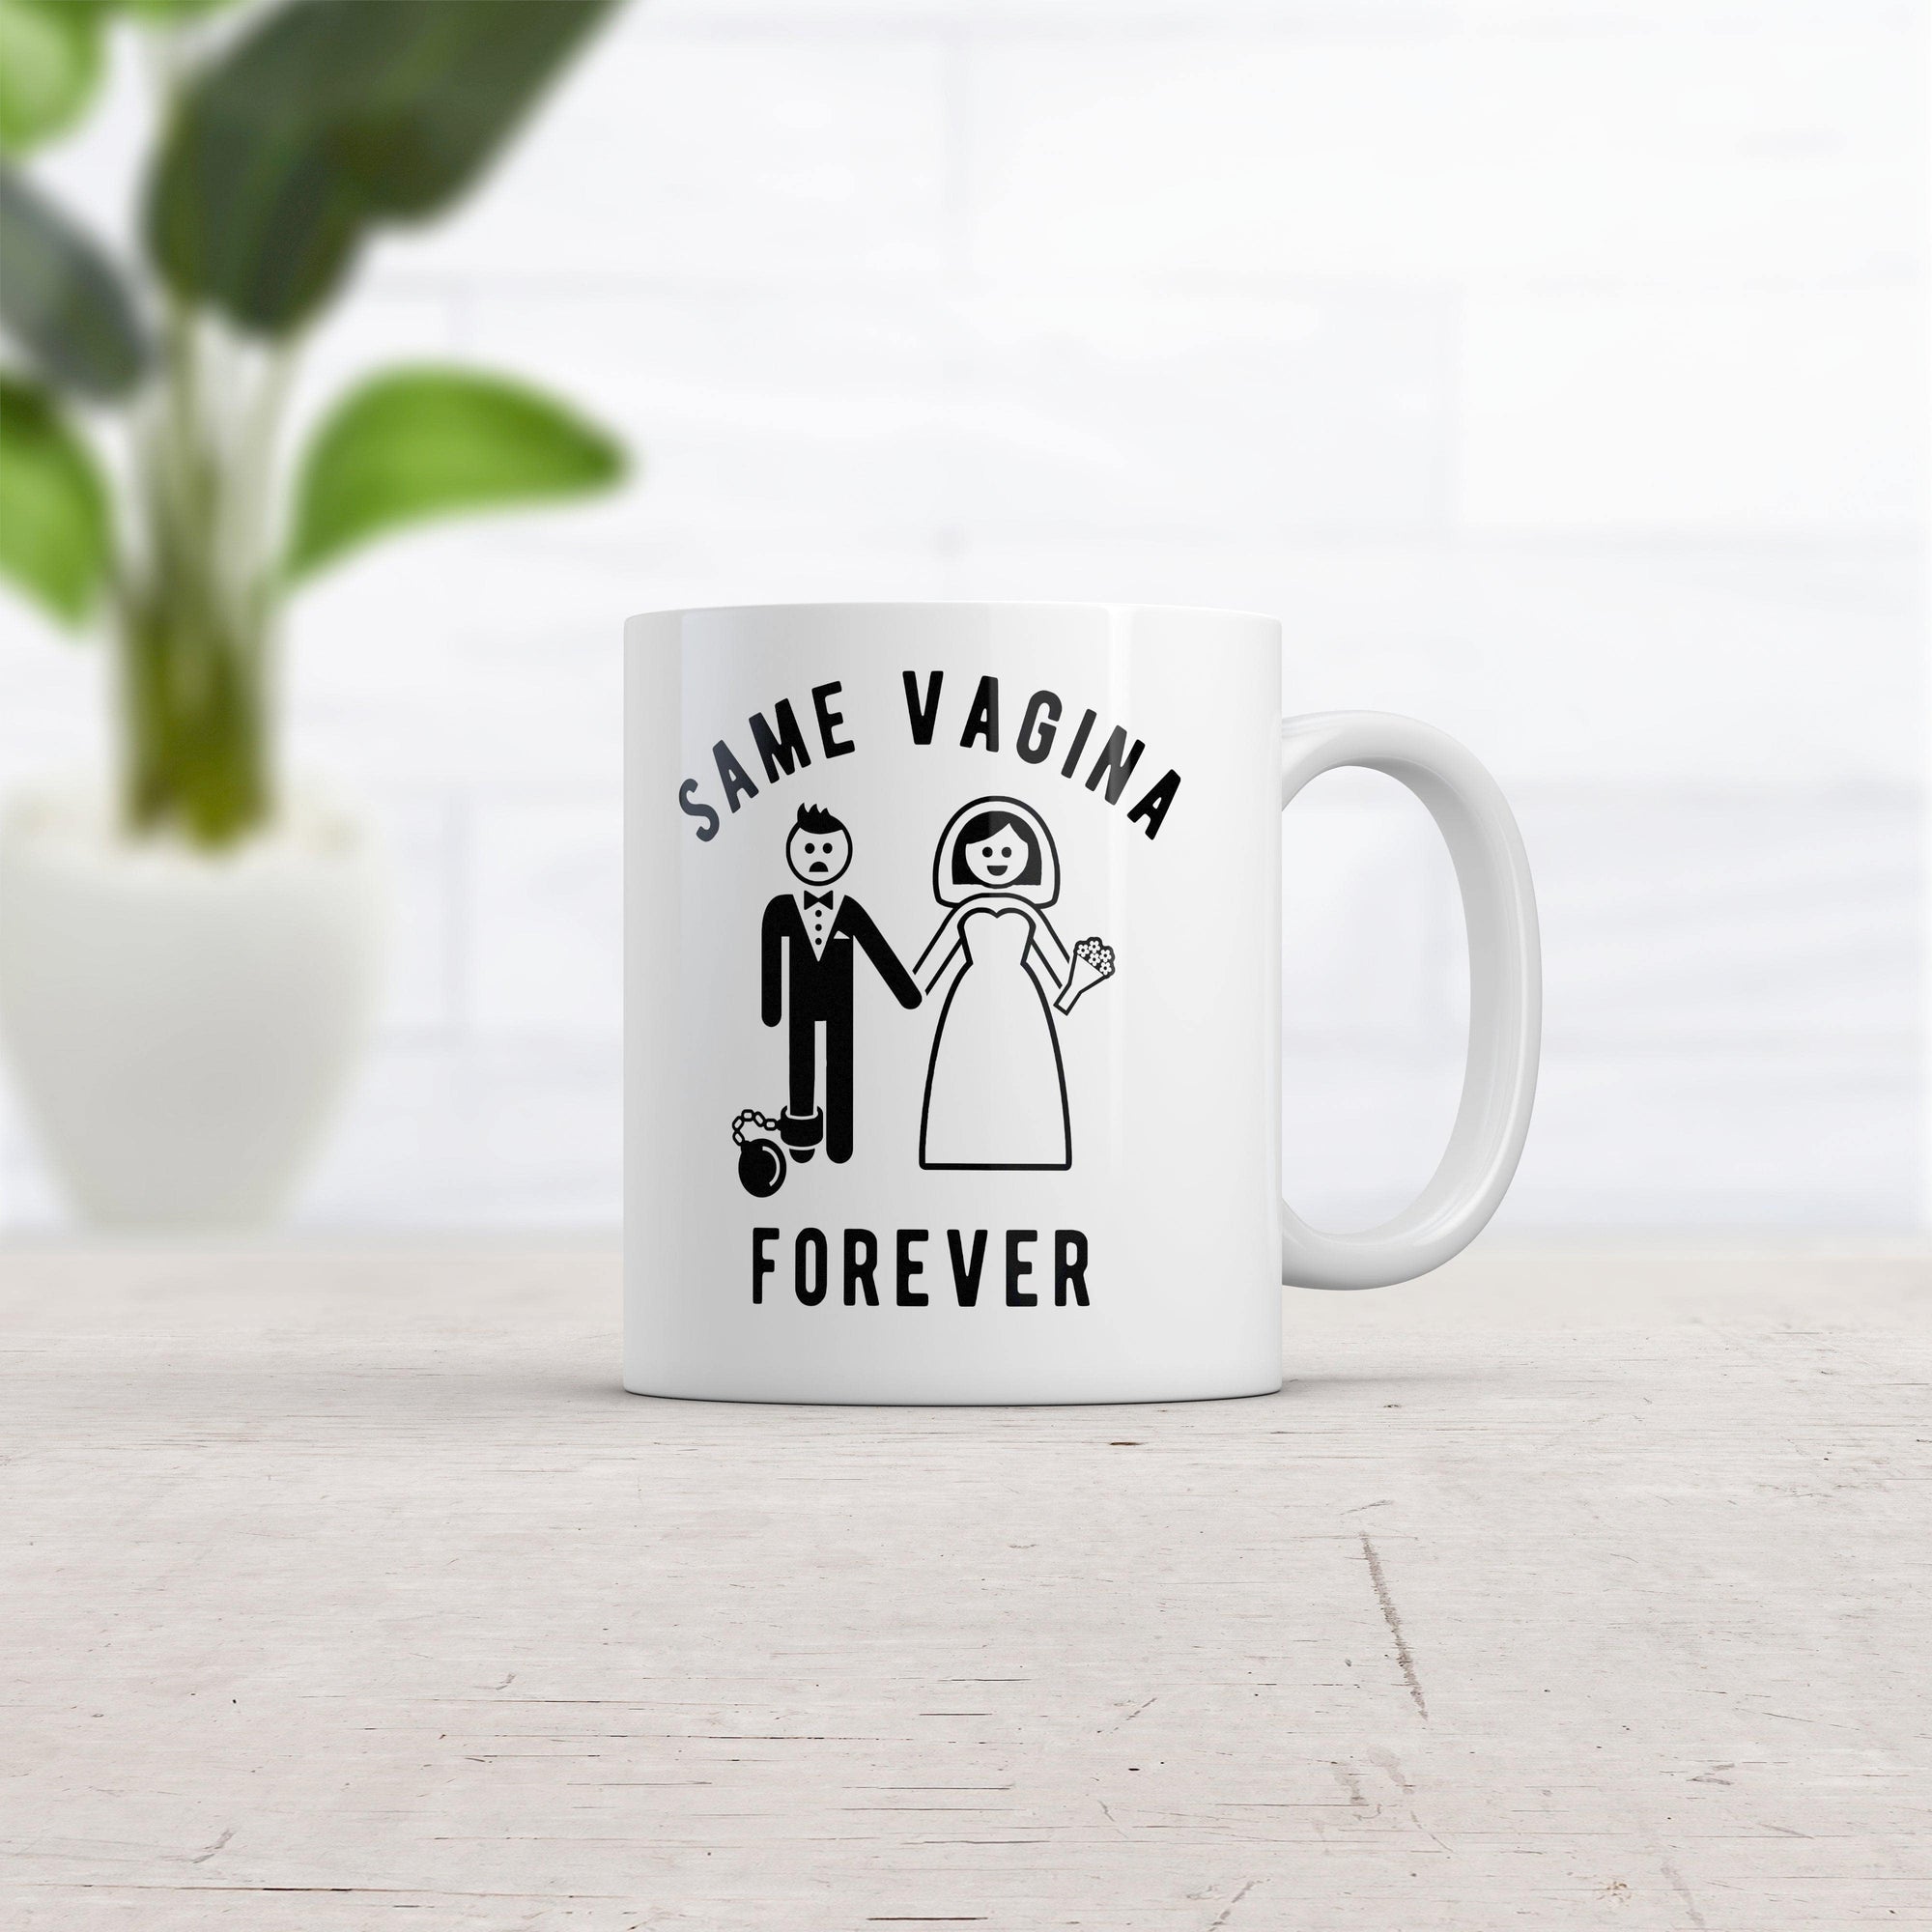 Same Vagina Forever Mug Funny Sarcastic Wedding Day Marriage Graphic Novelty Coffee Cup-11oz  -  Crazy Dog T-Shirts